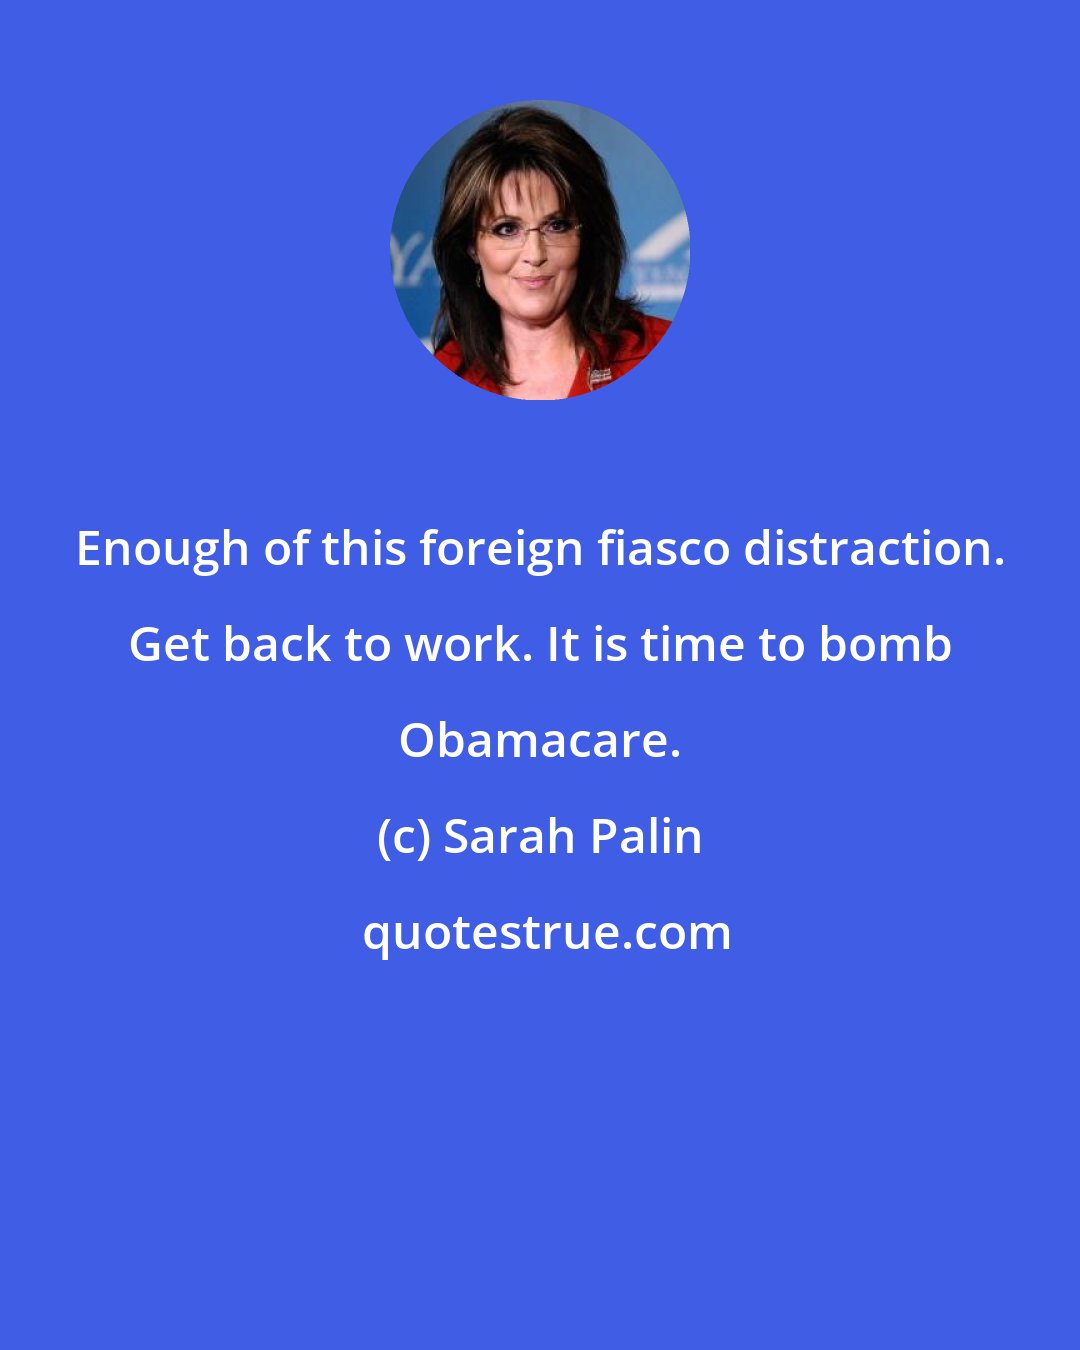 Sarah Palin: Enough of this foreign fiasco distraction. Get back to work. It is time to bomb Obamacare.